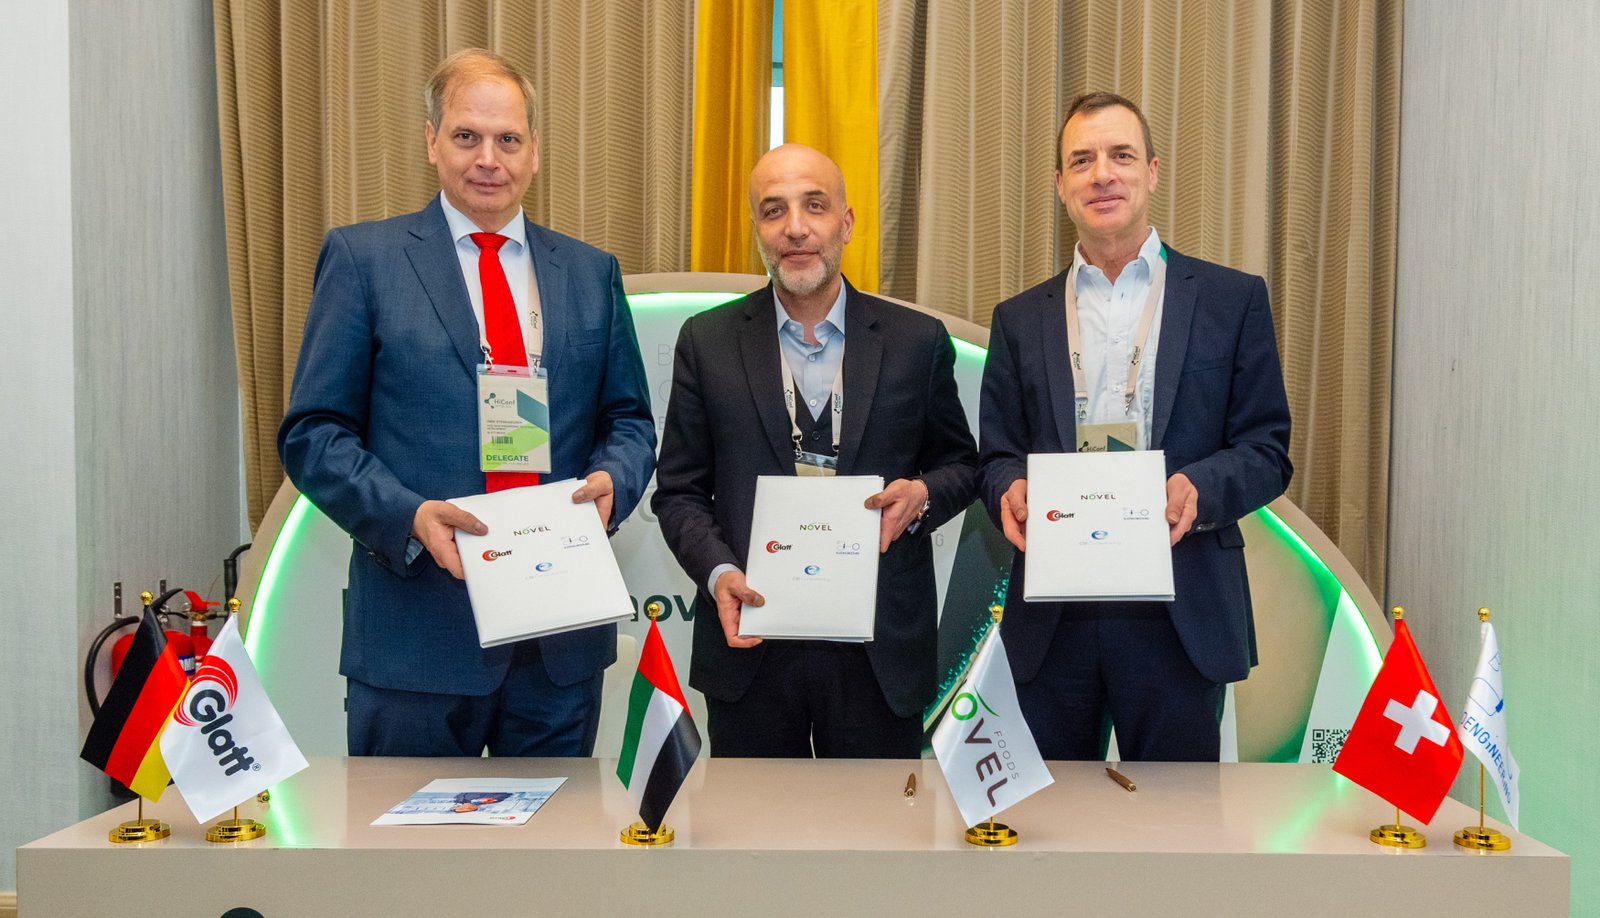 Novel Foods Group and partners reveal plan for new biotech cluster in the UAE